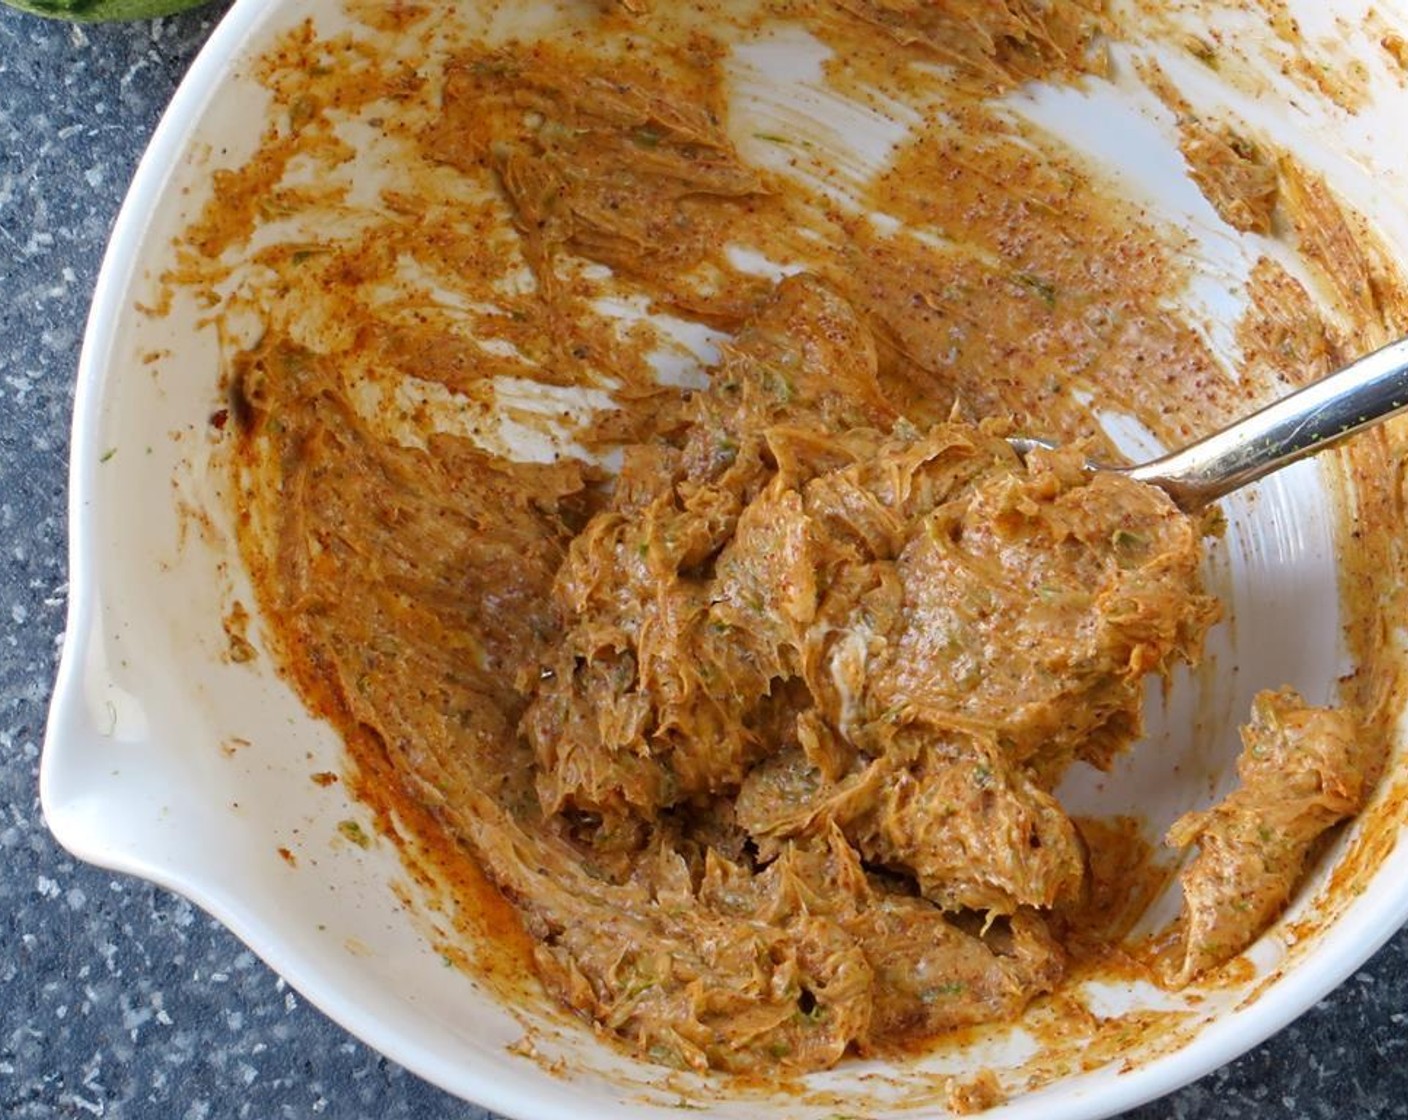 step 2 In a small bowl, combine the Butter (1/4 cup), Chipotle Chili Powder (1 tsp), Lime (1), Kosher Salt (1/4 tsp) and Ground Black Pepper (1/4 tsp). Using the back of a fork, work the ingredients together until well combined.